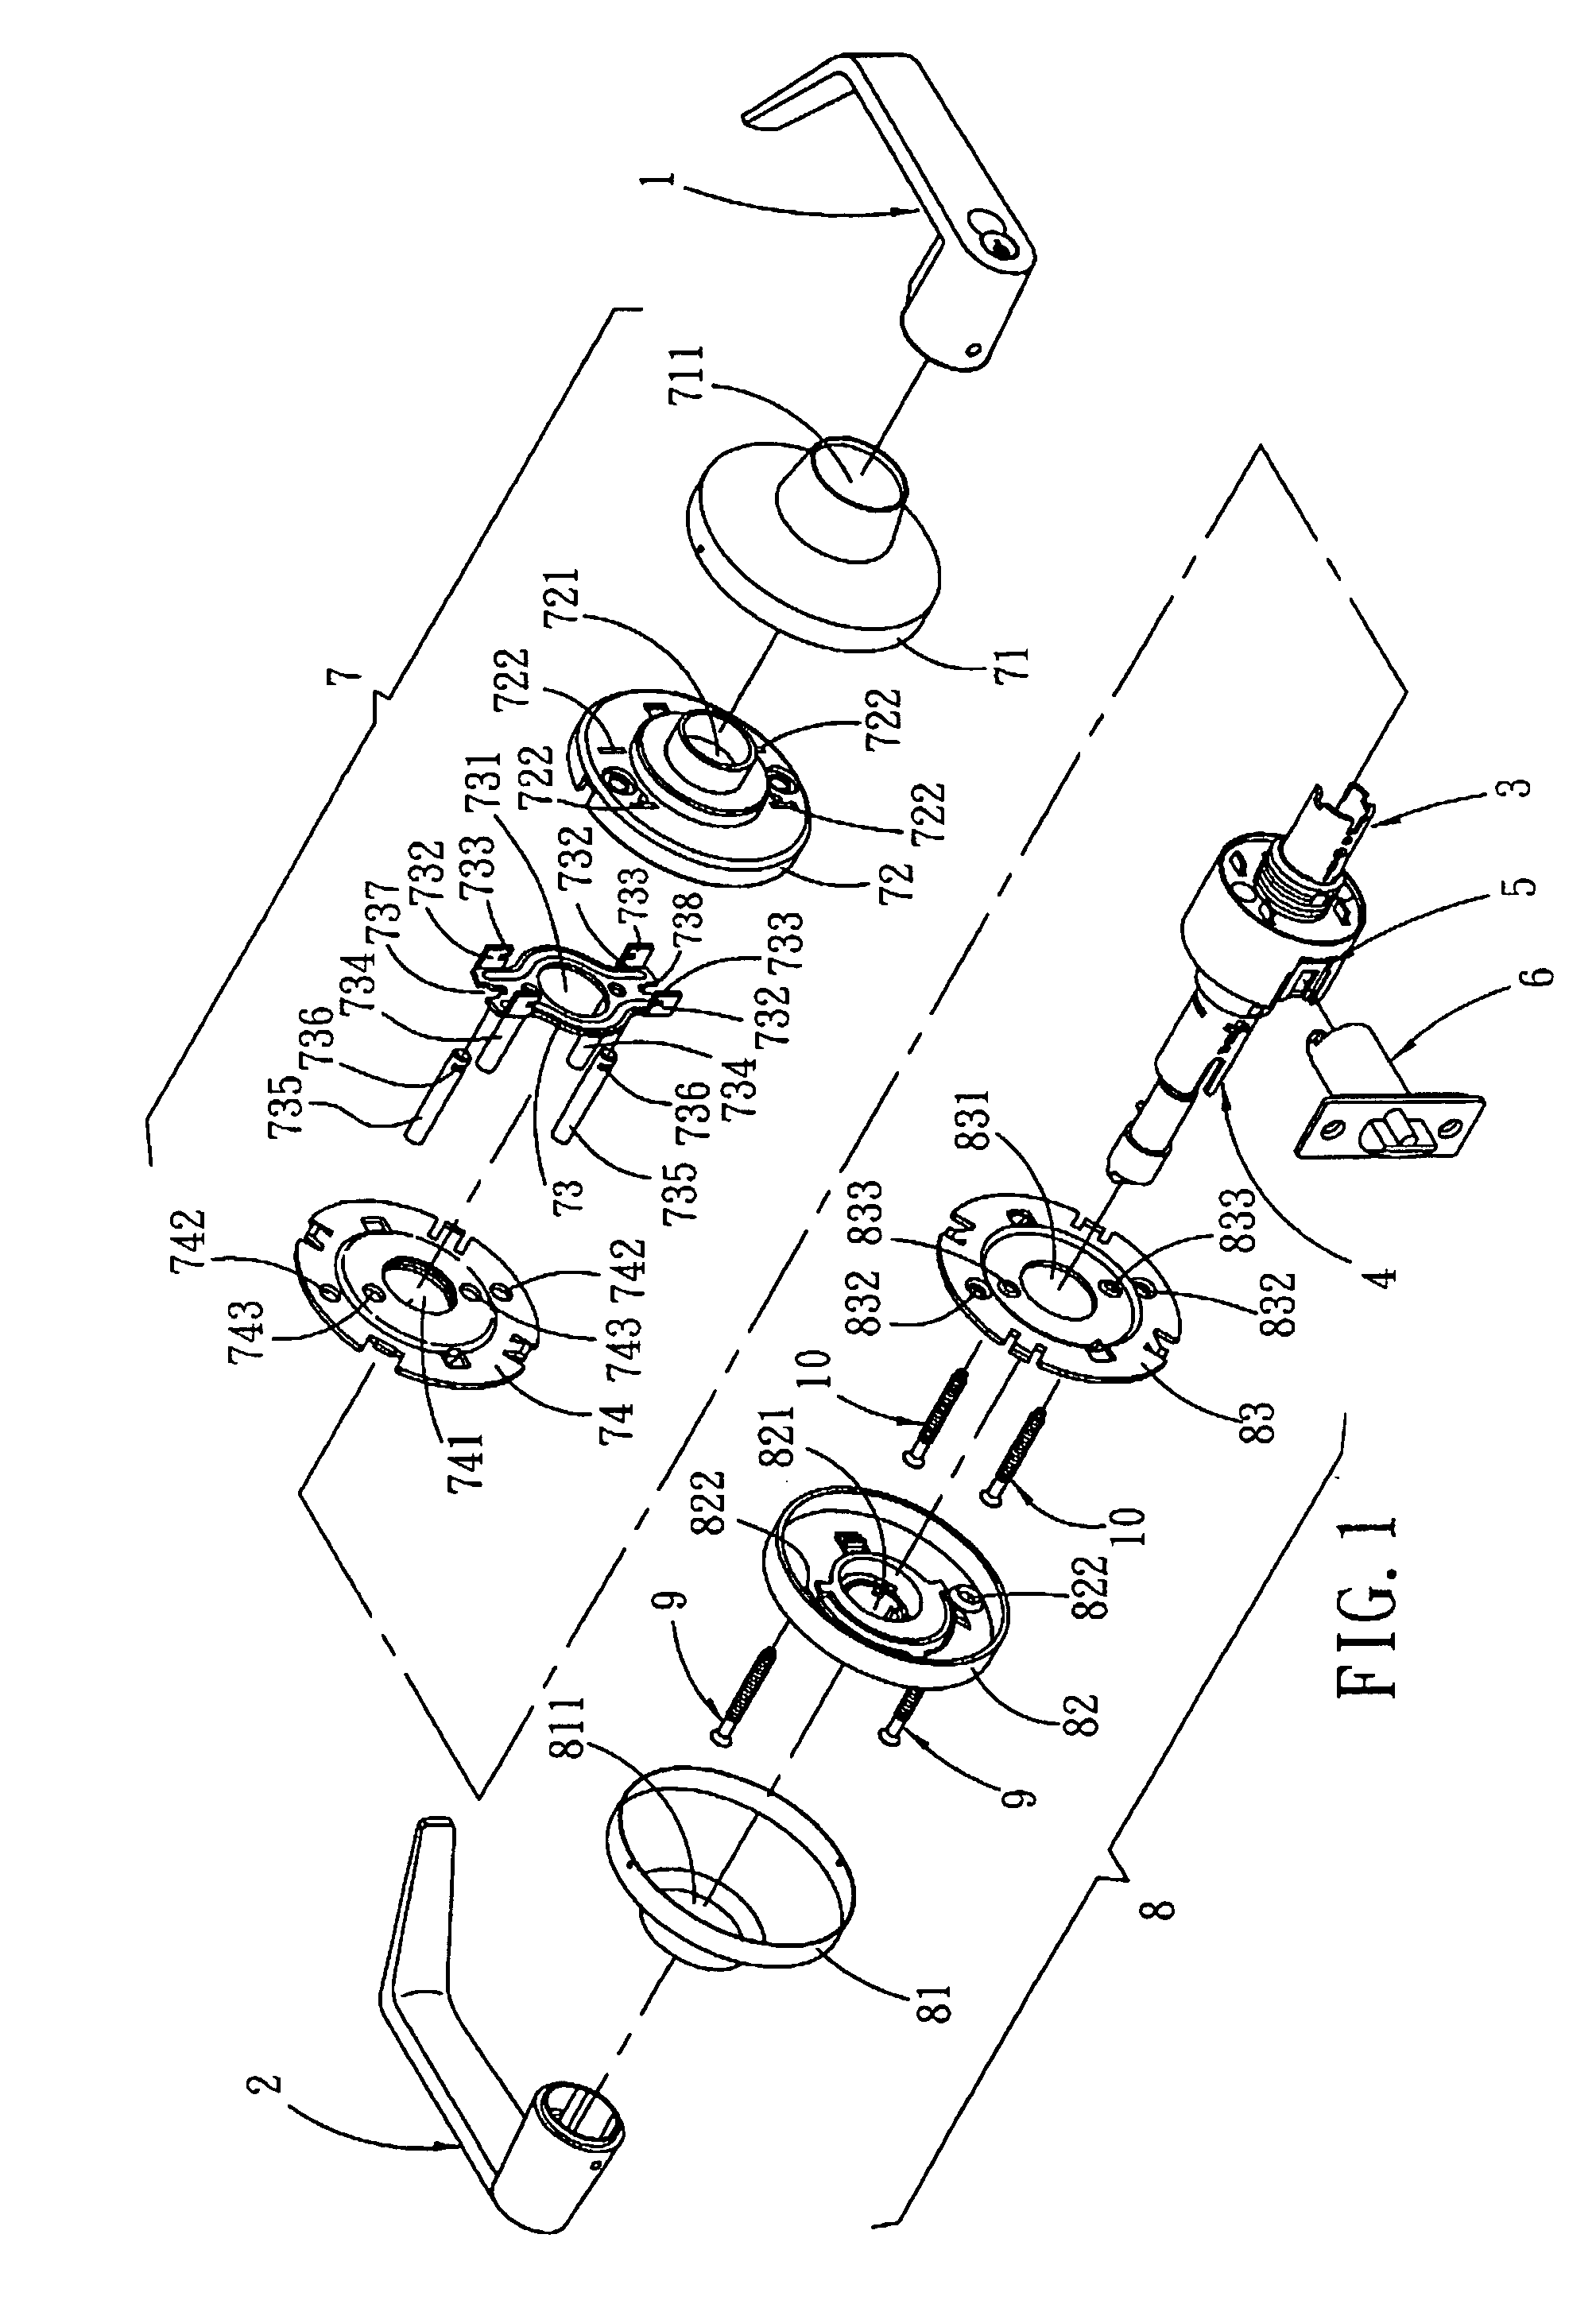 Post-removable construction of a door lock device